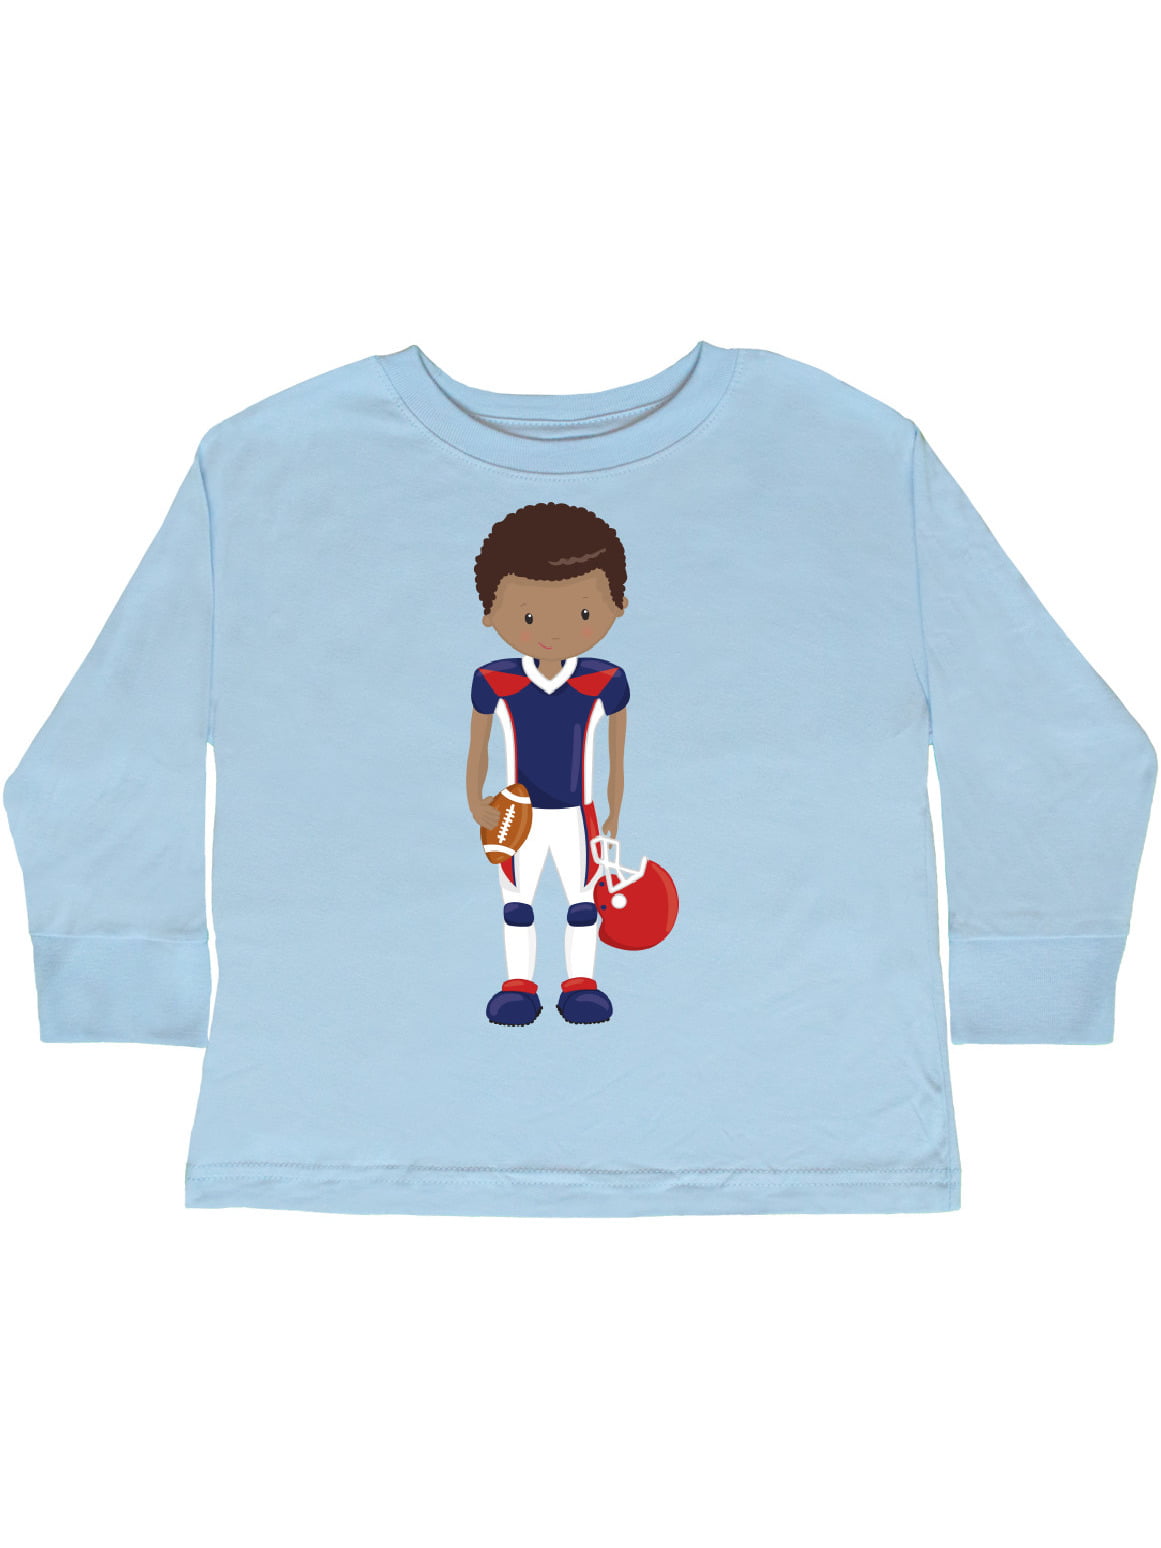 Mens n Kids Long Sleeve Football Shirt Jerseys Mix and Match Sizes and Colours 